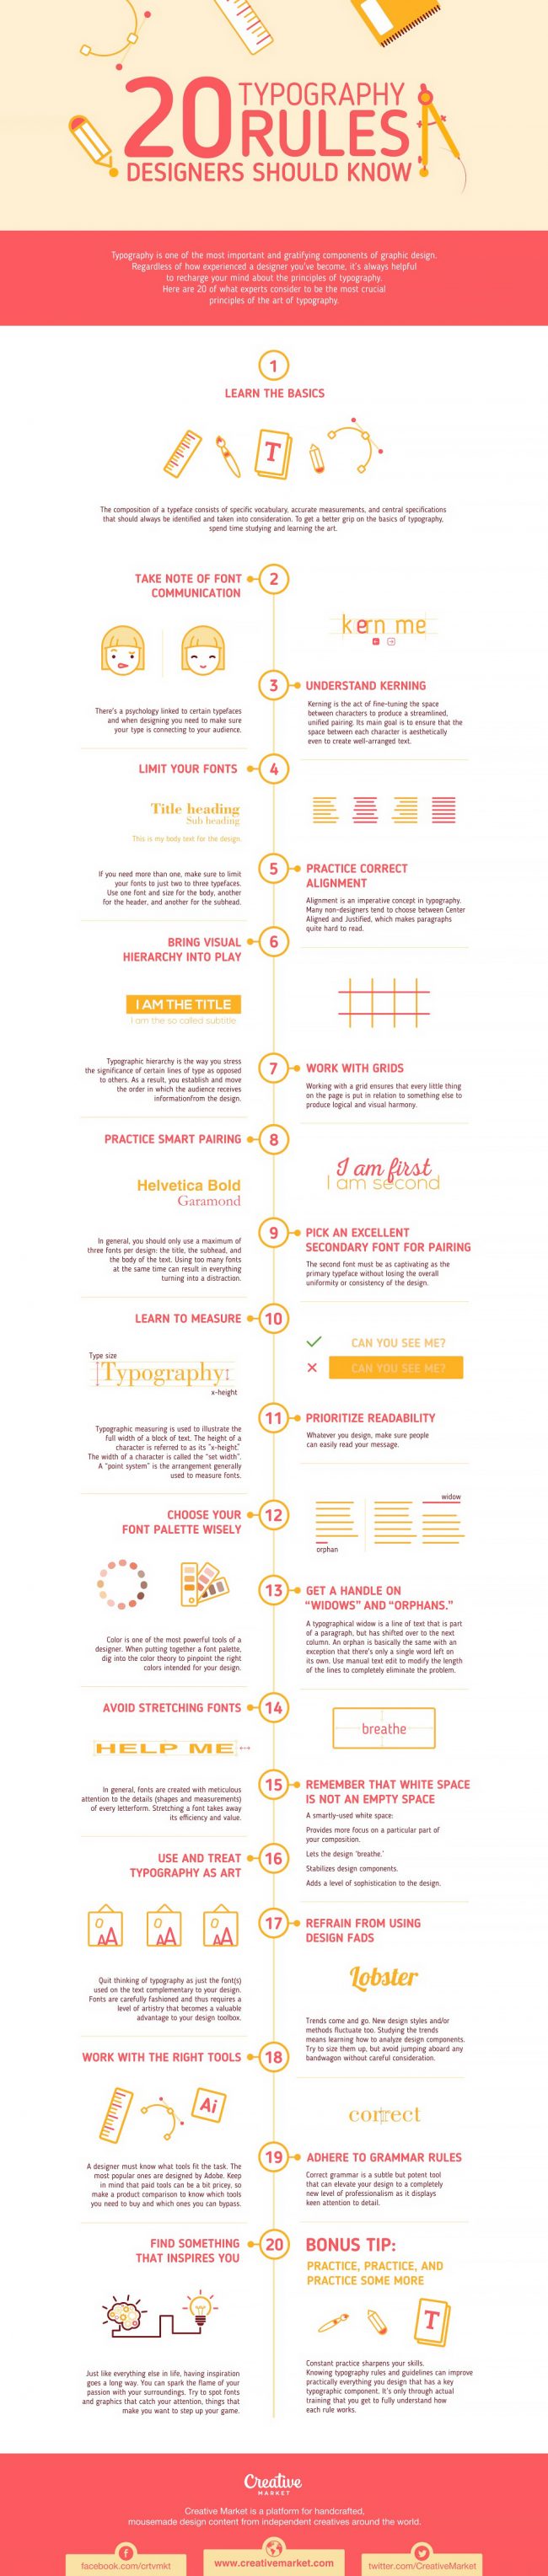 Graphic Design Typography Rules Infographic